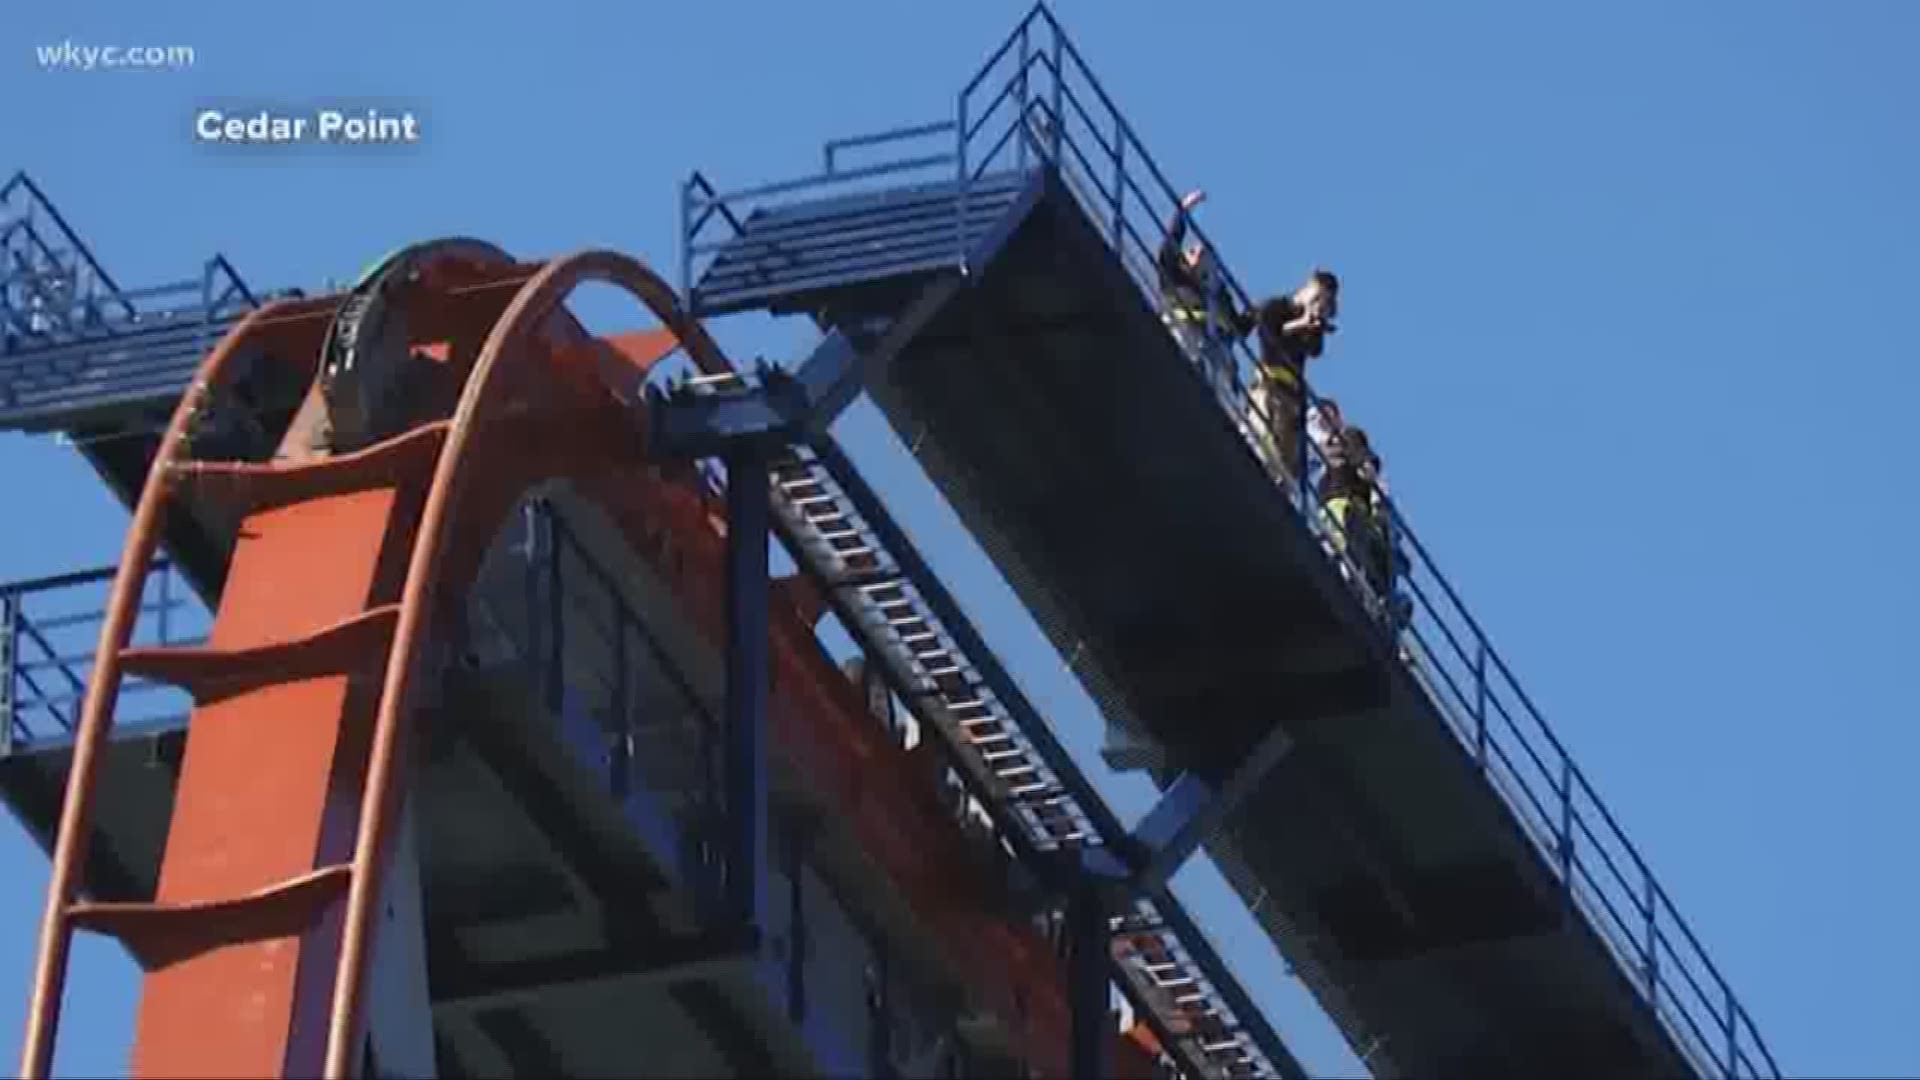 May 2, 2019: Tomorrow morning, we take our show to extreme heights as Maureen Kyle and Dave Chudowsky are live from the top of the massive hill on Cedar Point's Valravn roller coaster.